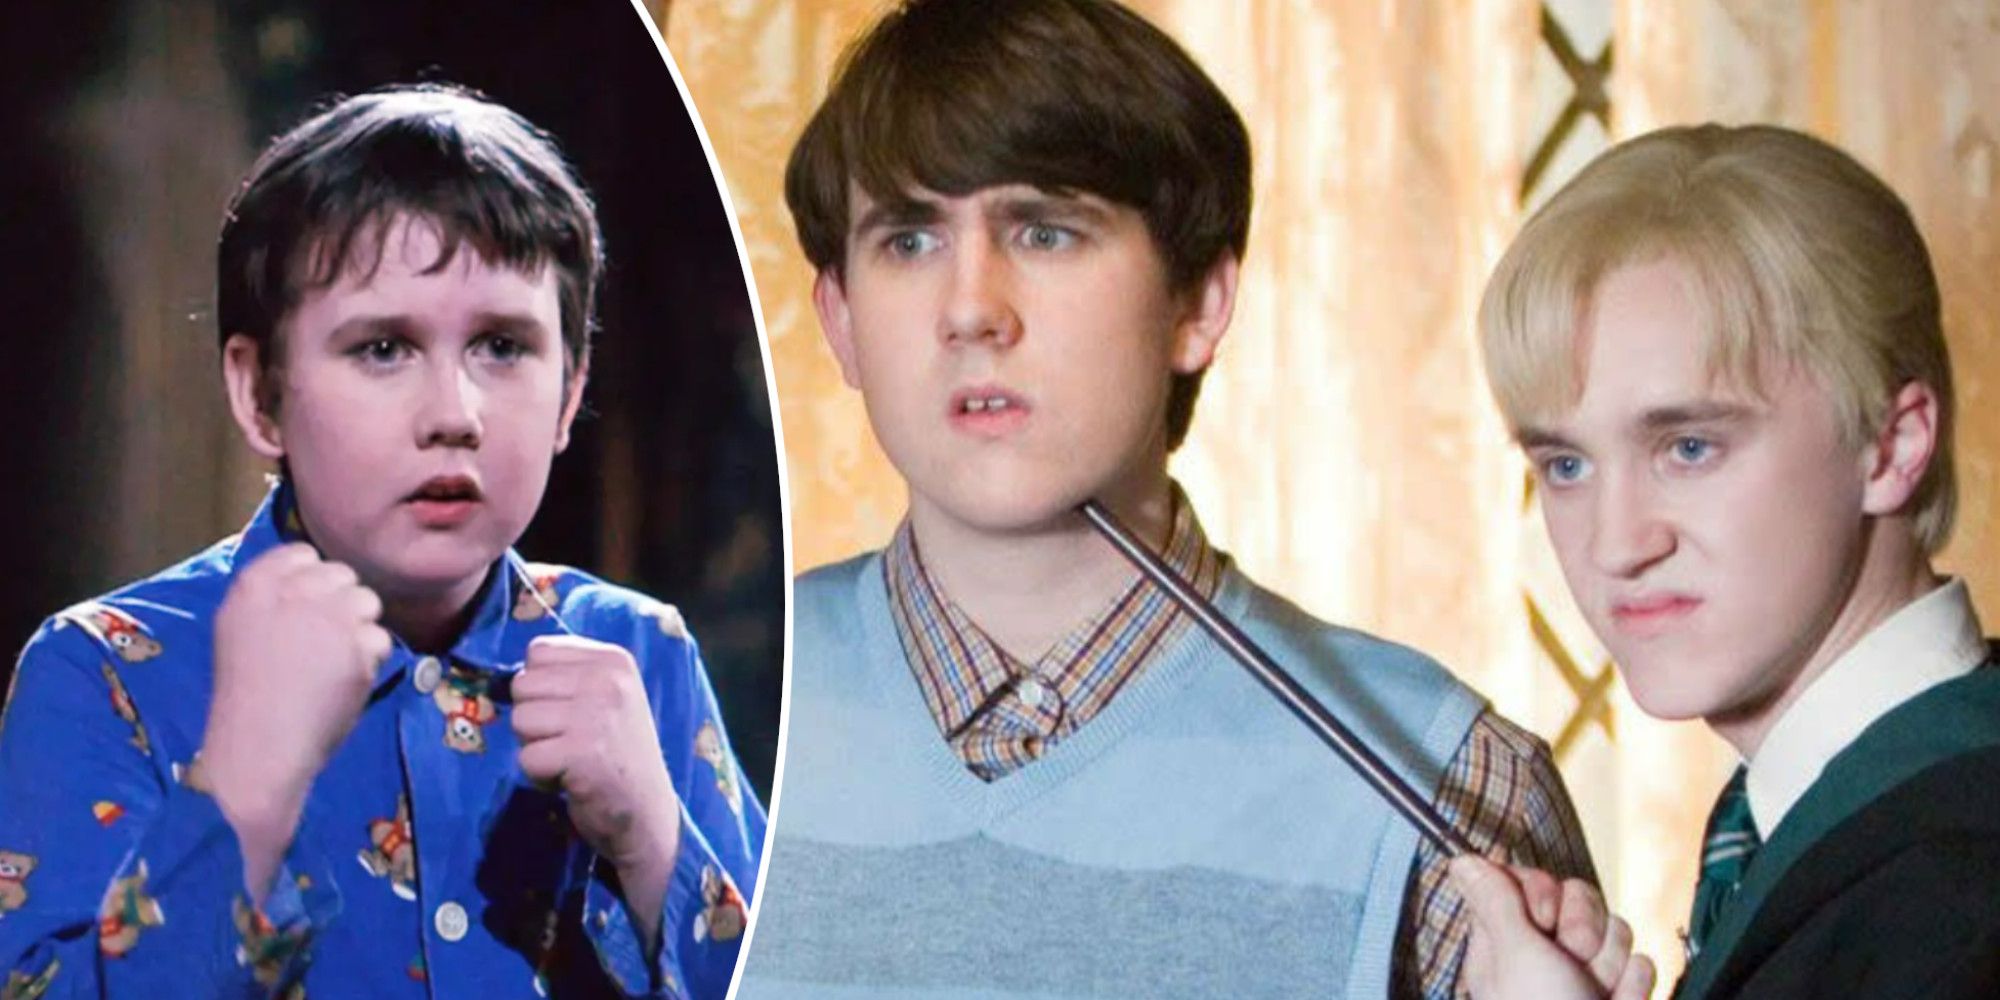 Harry Potter Ways Neville Longbottom Could Be The Perfect Chosen One Neville and vs Friends and Foes Draco Malfoy